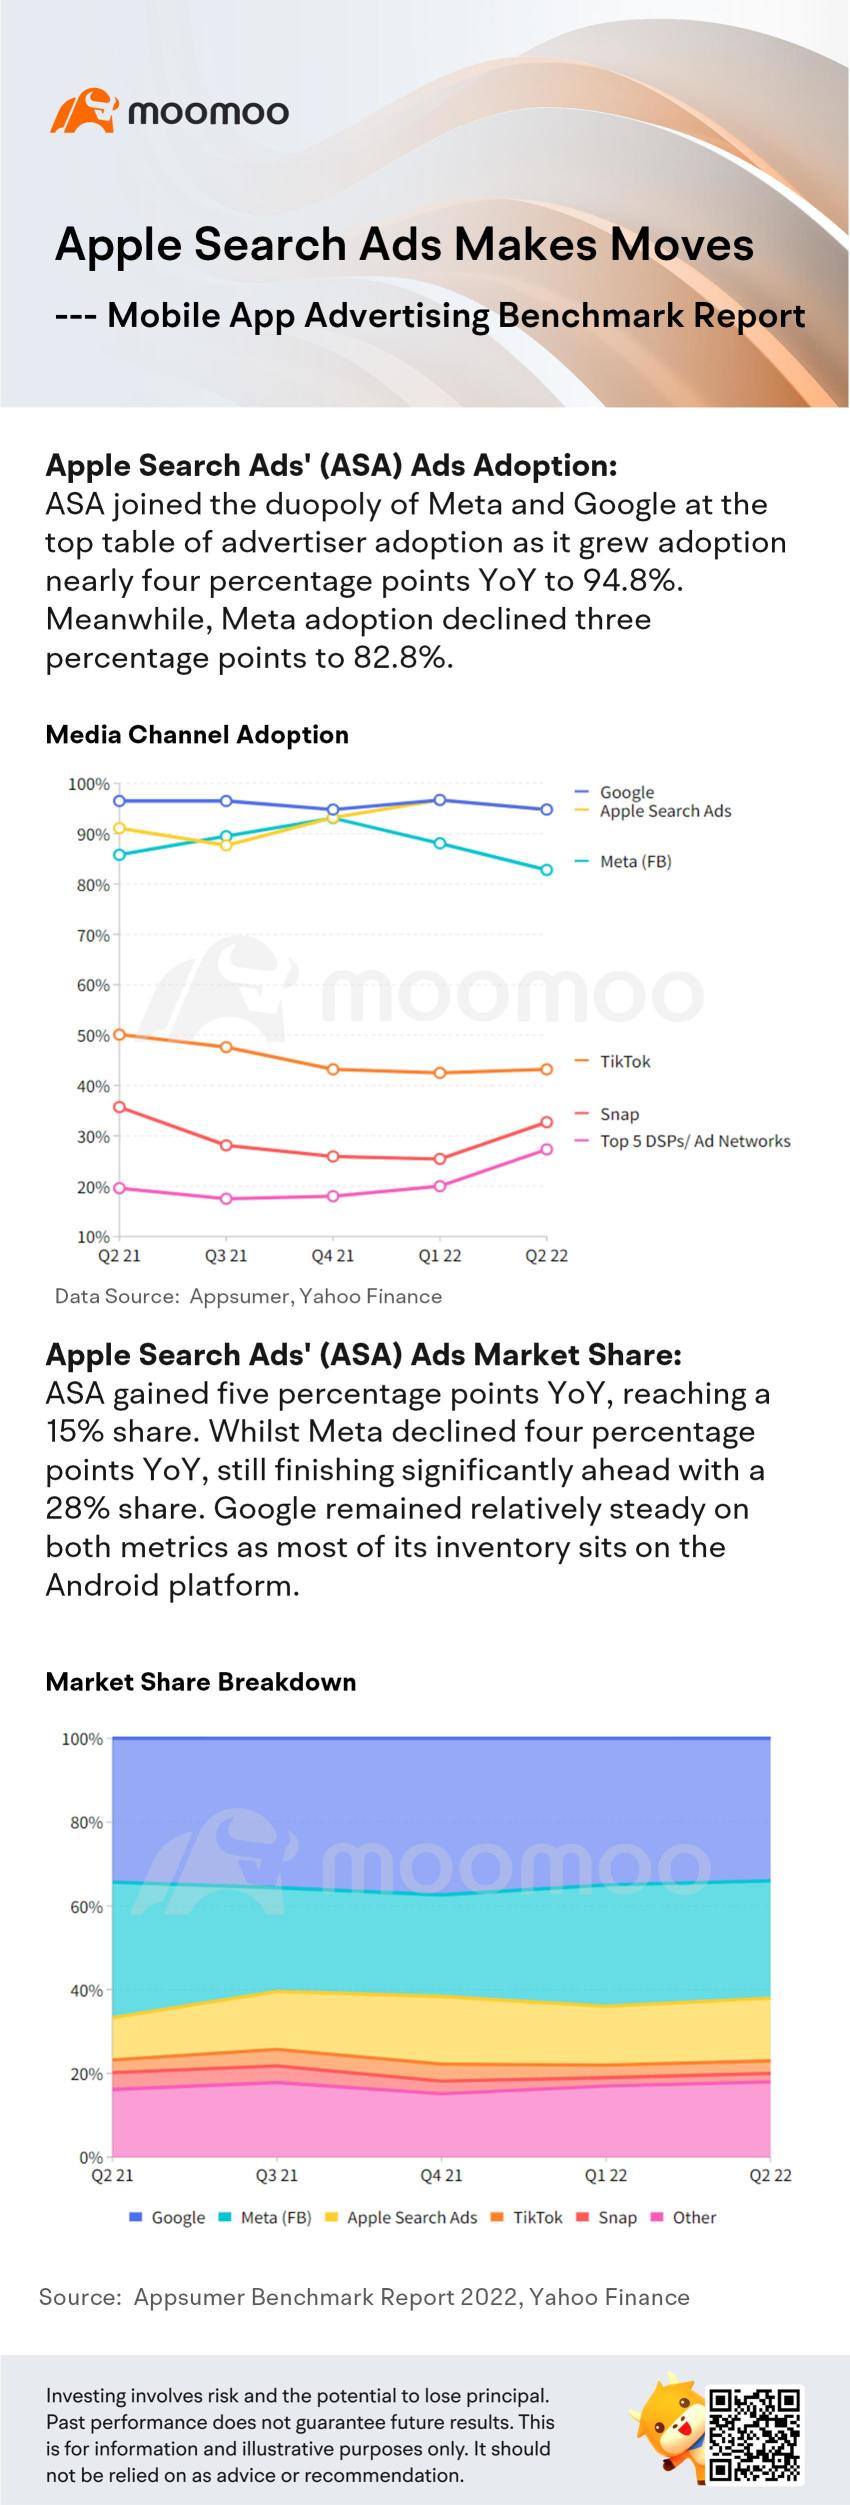 Apple&#039;s Digital Ad Business Is Gaining an Edge Over Google and Facebook, Here Is Why.